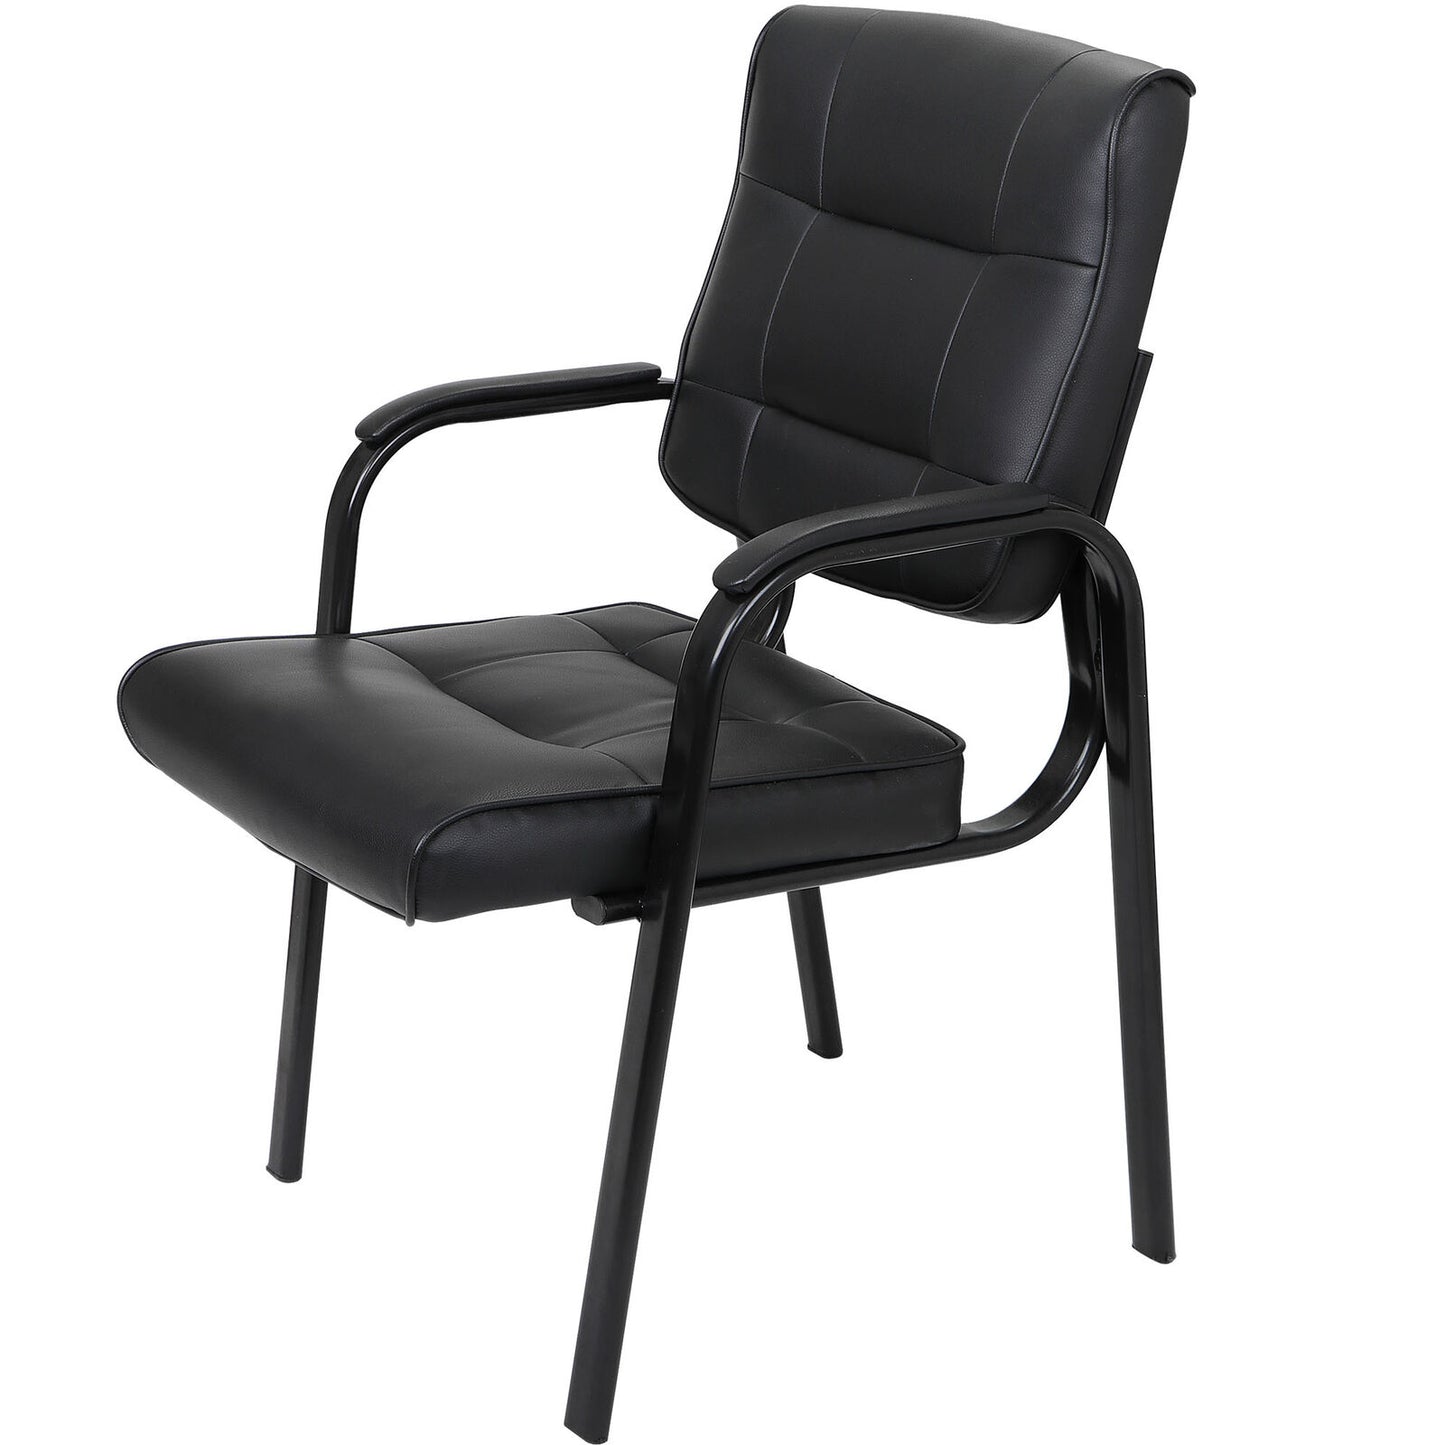 Black Leather Guest Chair Reception Waiting Room Office Desk Side Chairs Classic